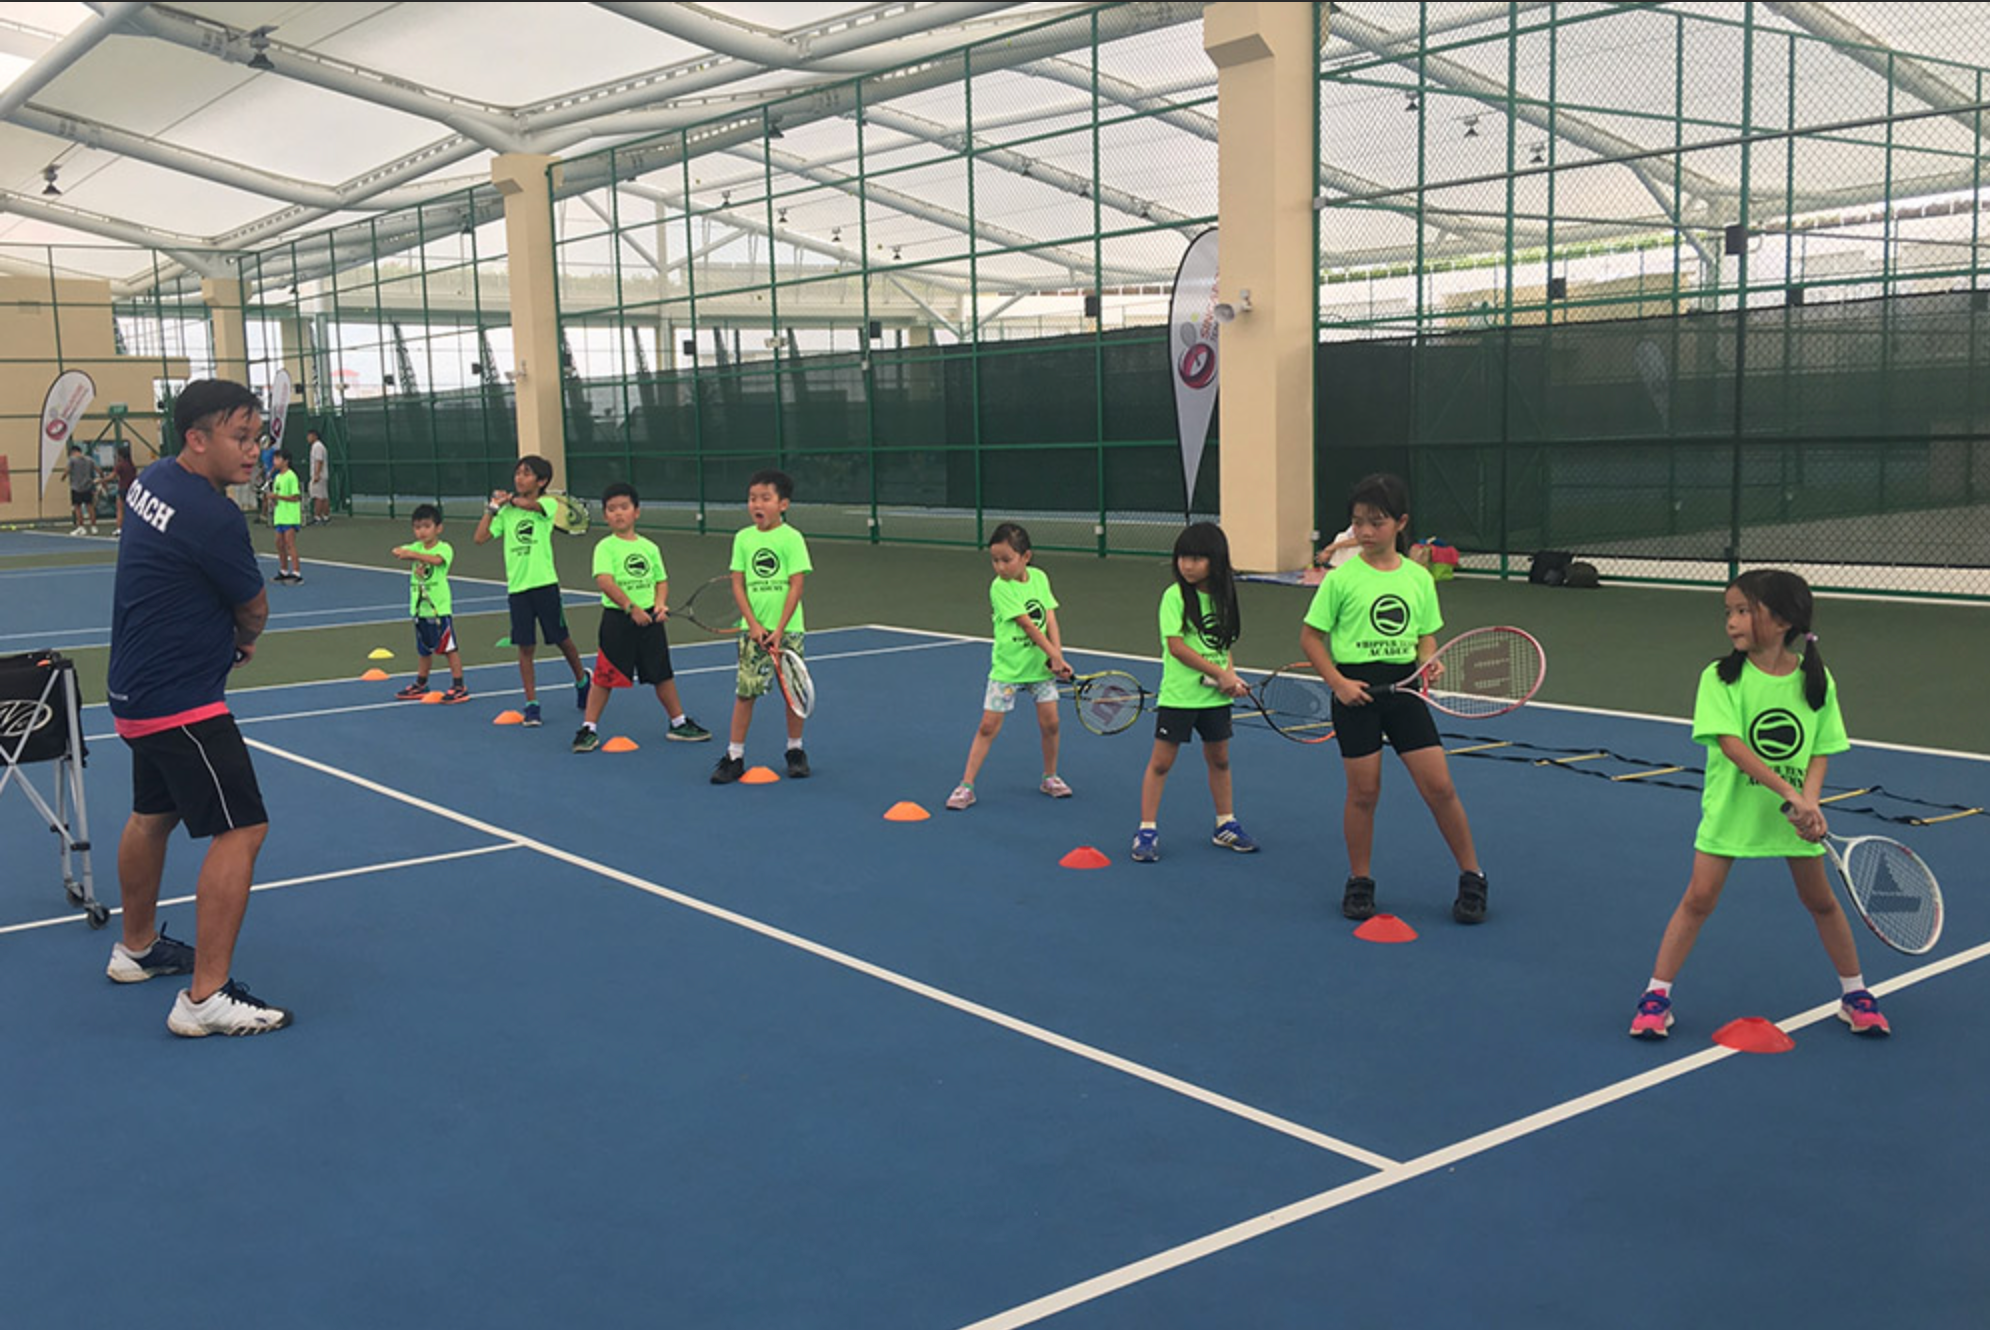 Kids Tennis Lesson Starting from $80 Per Hour